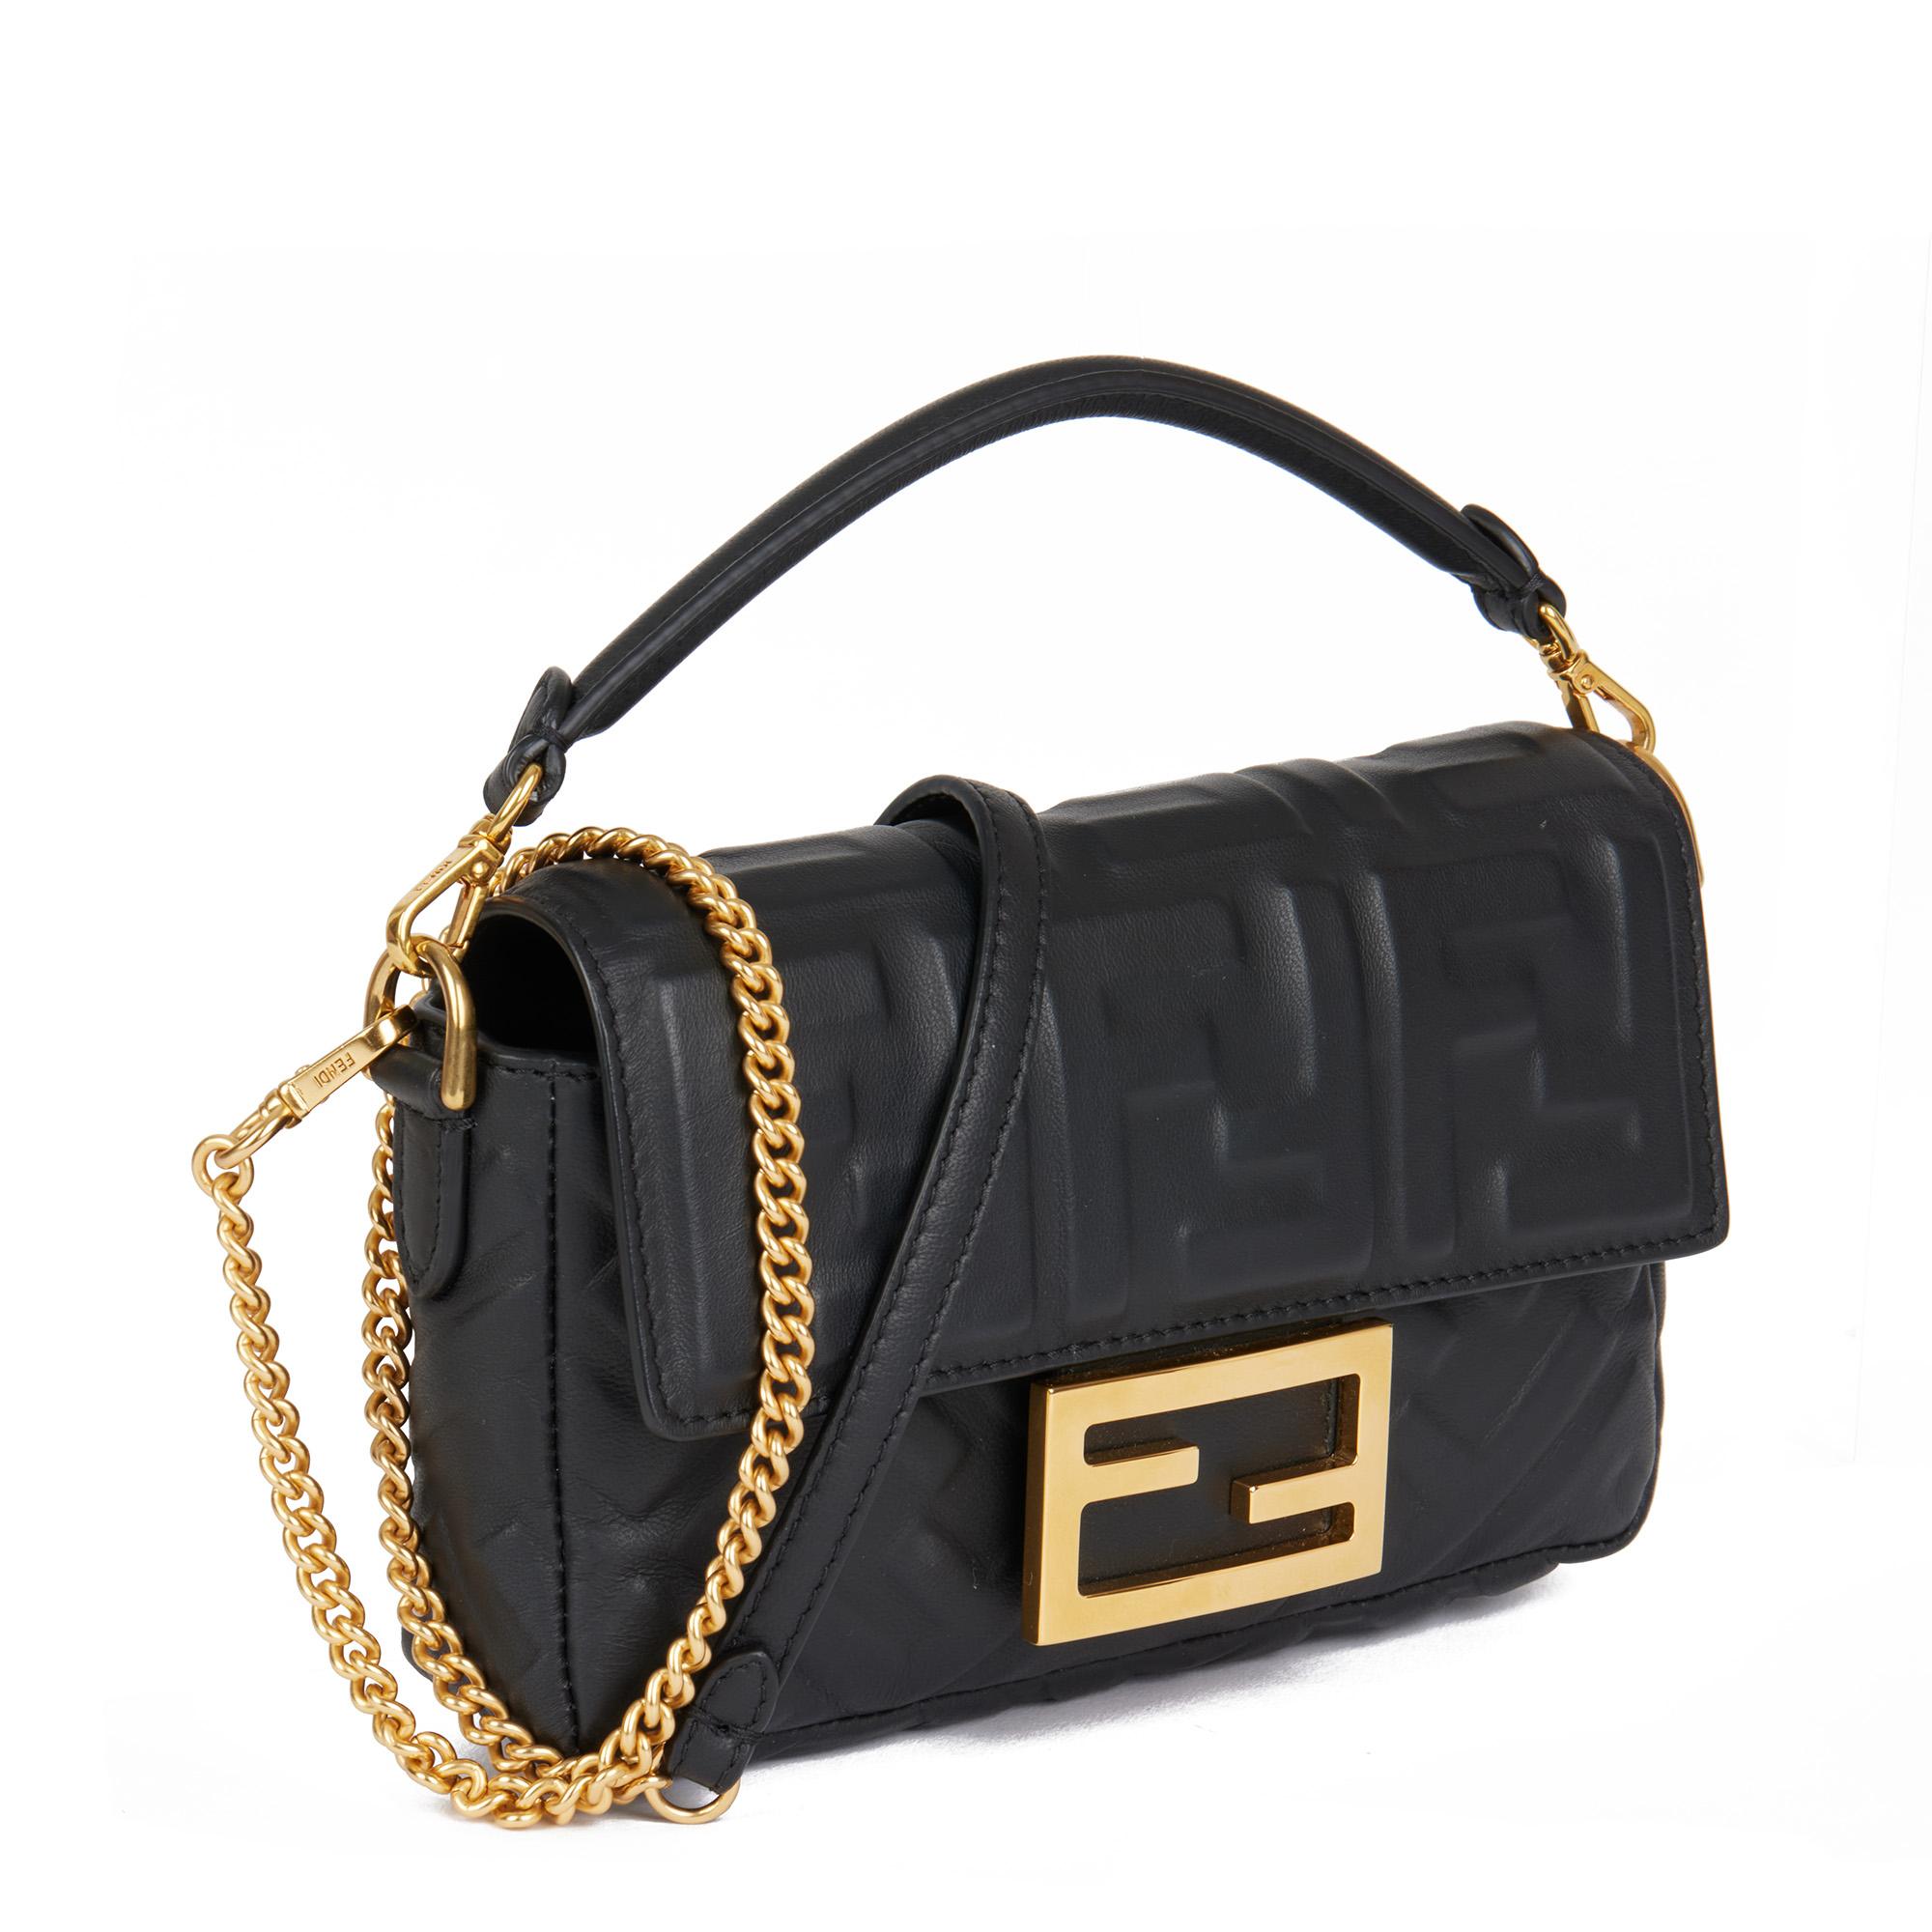 FENDI
Black Nappa Leather Baguette 

Xupes Reference: CB610
Serial Number: 8BS017-A72V.209.10429
Age (Circa): 2010
Accompanied By: Fendi Dust Bag
Authenticity Details: Date Stamp (Made in Italy)
Gender: Ladies
Type: Shoulder, Top Handle,